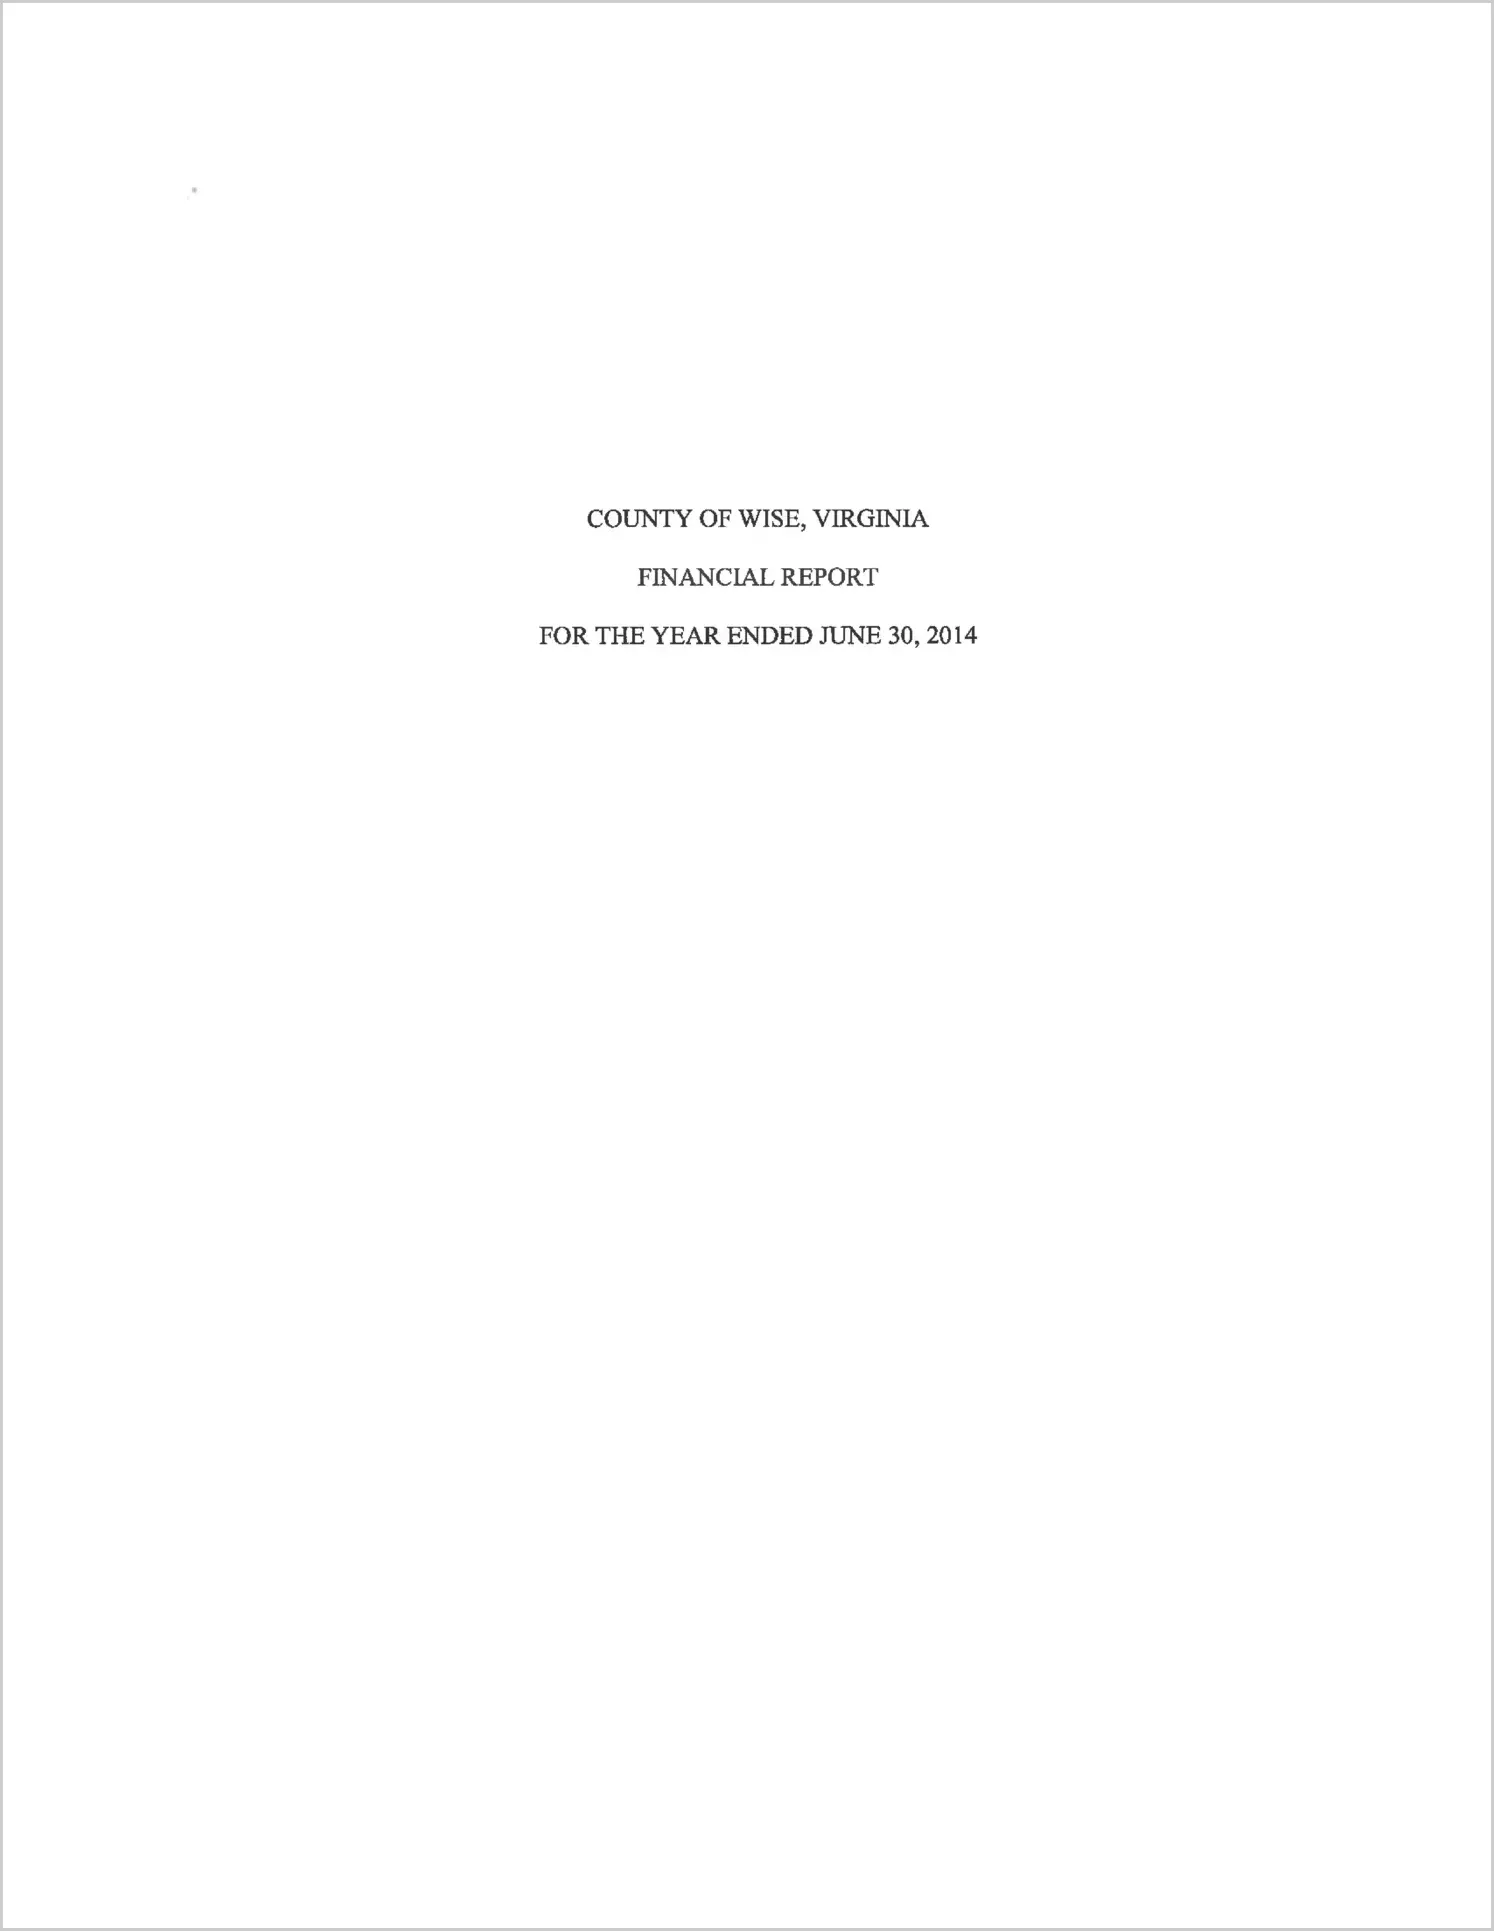 2014 Annual Financial Report for County of Wise